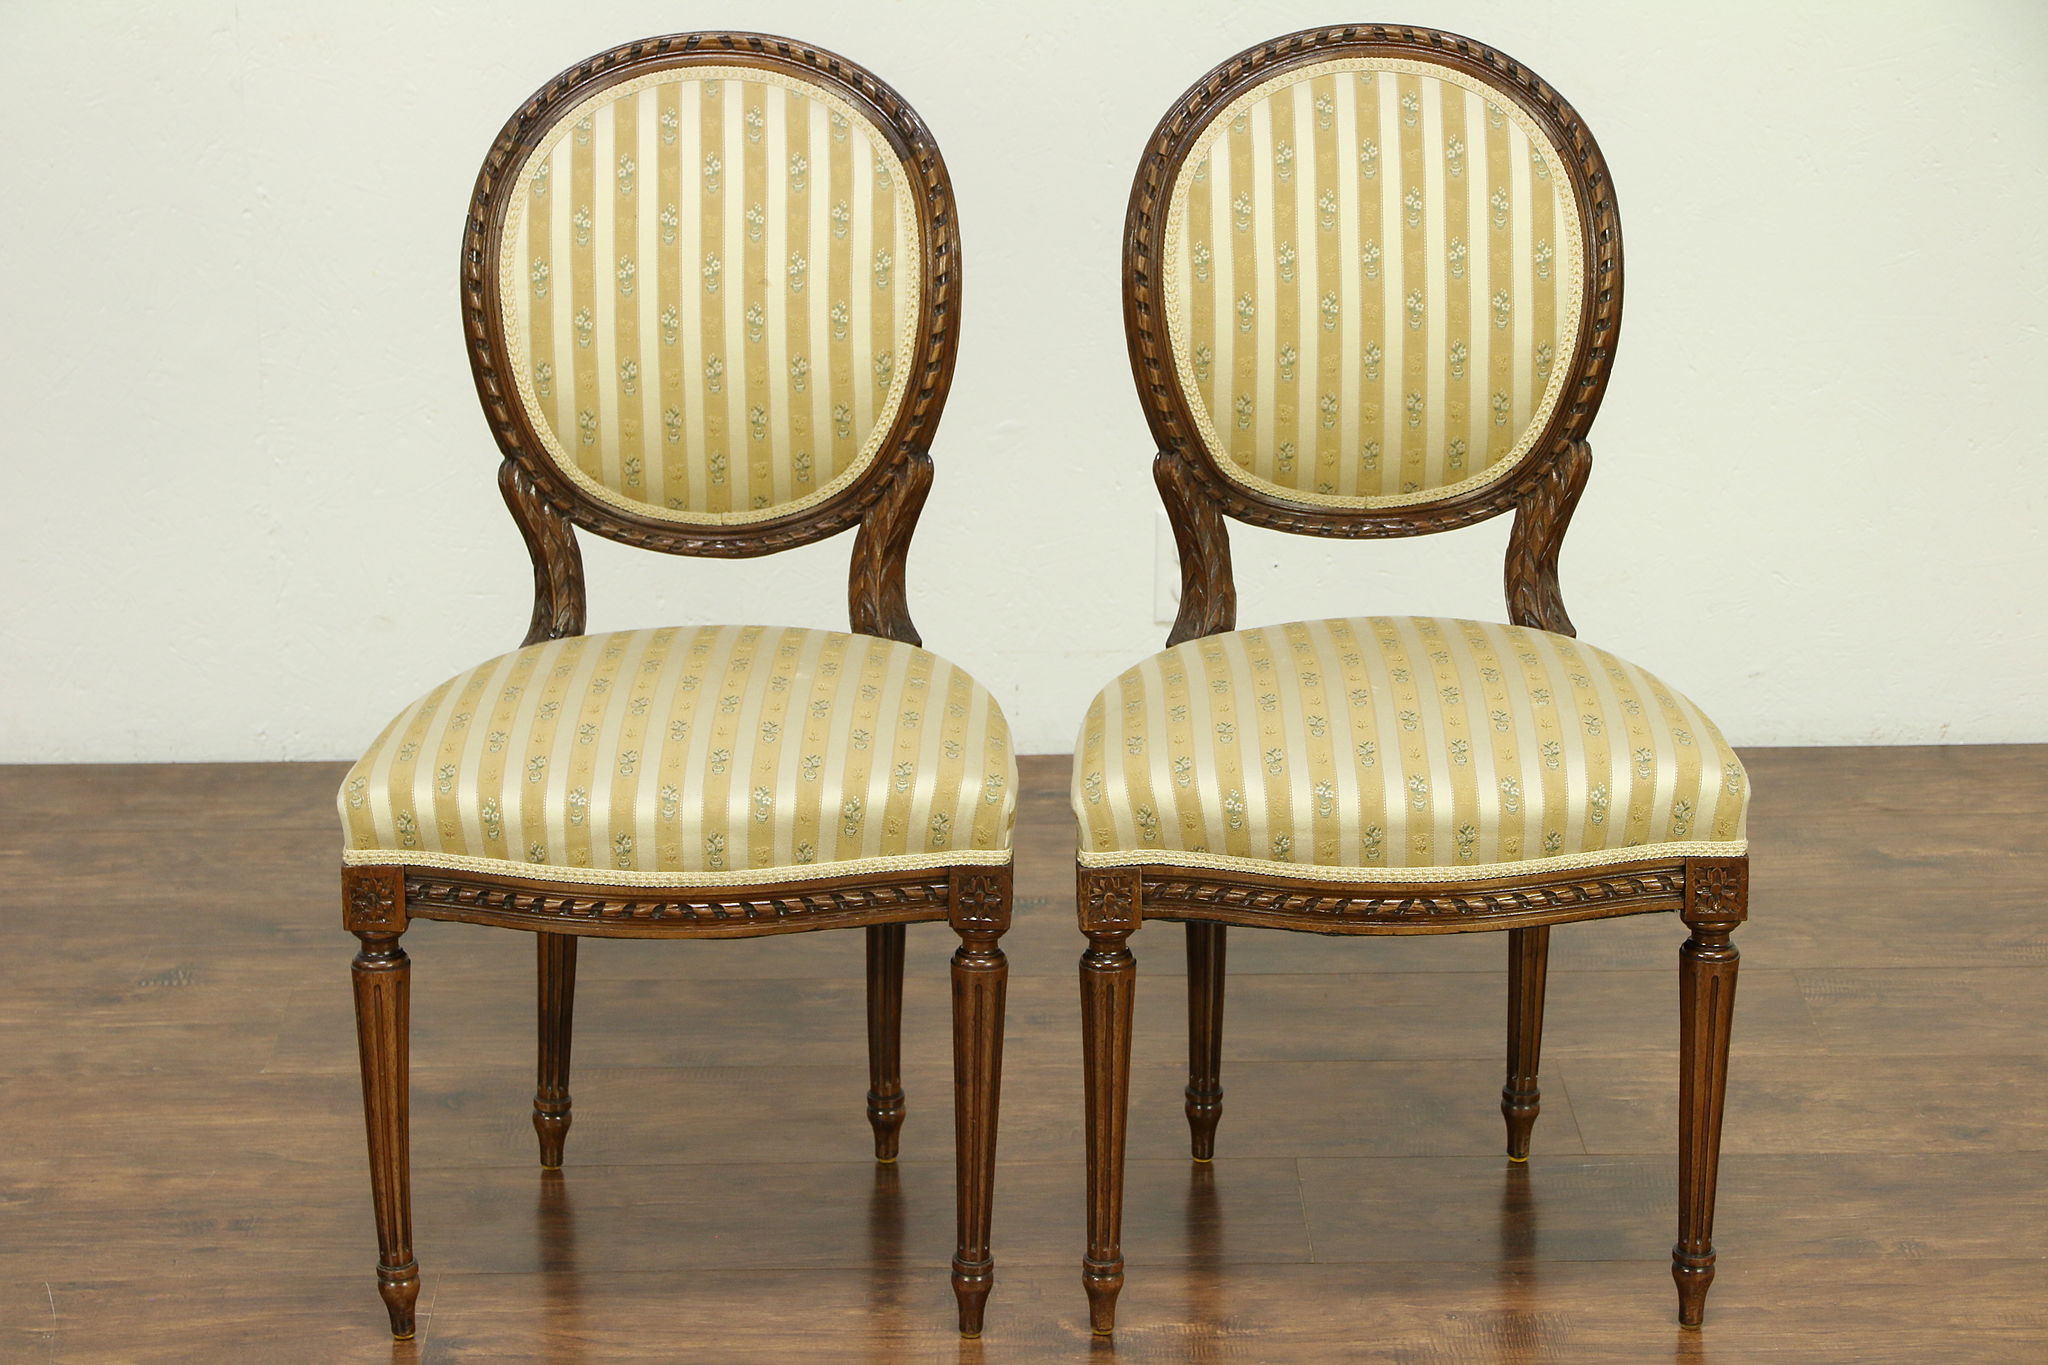 Antique Pair Carved Fruitwood Side Chairs, Antique French Louis Xvi Chairs